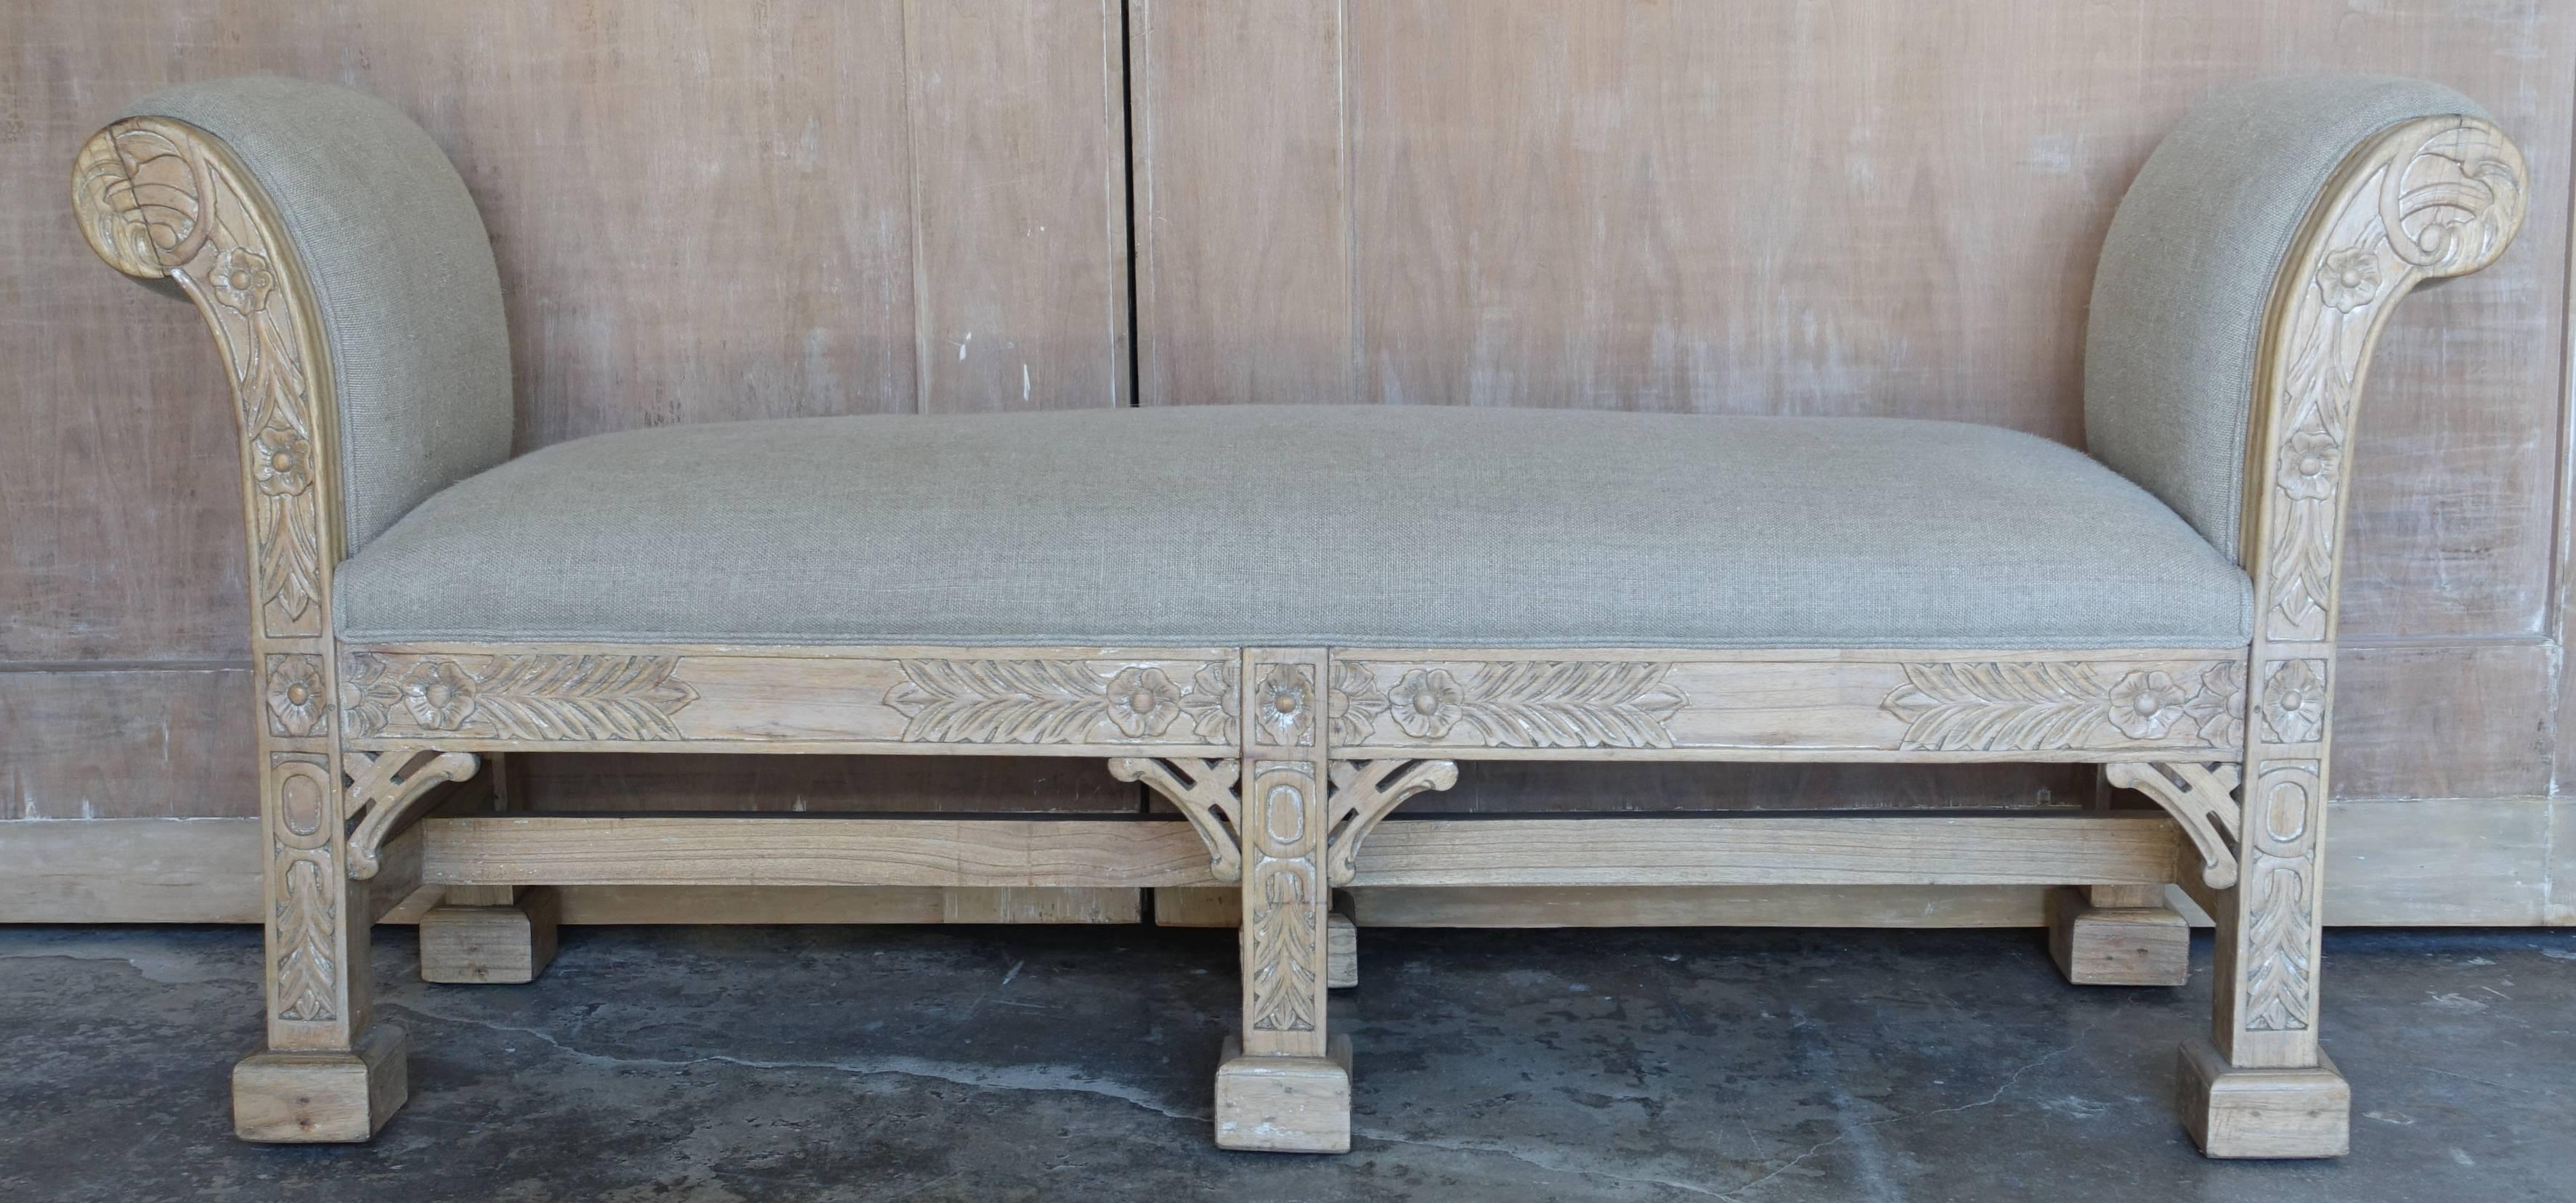 English chinoiserie style six-legged carved natural wood bench newly upholstered in Belgium linen with a self cord detail.